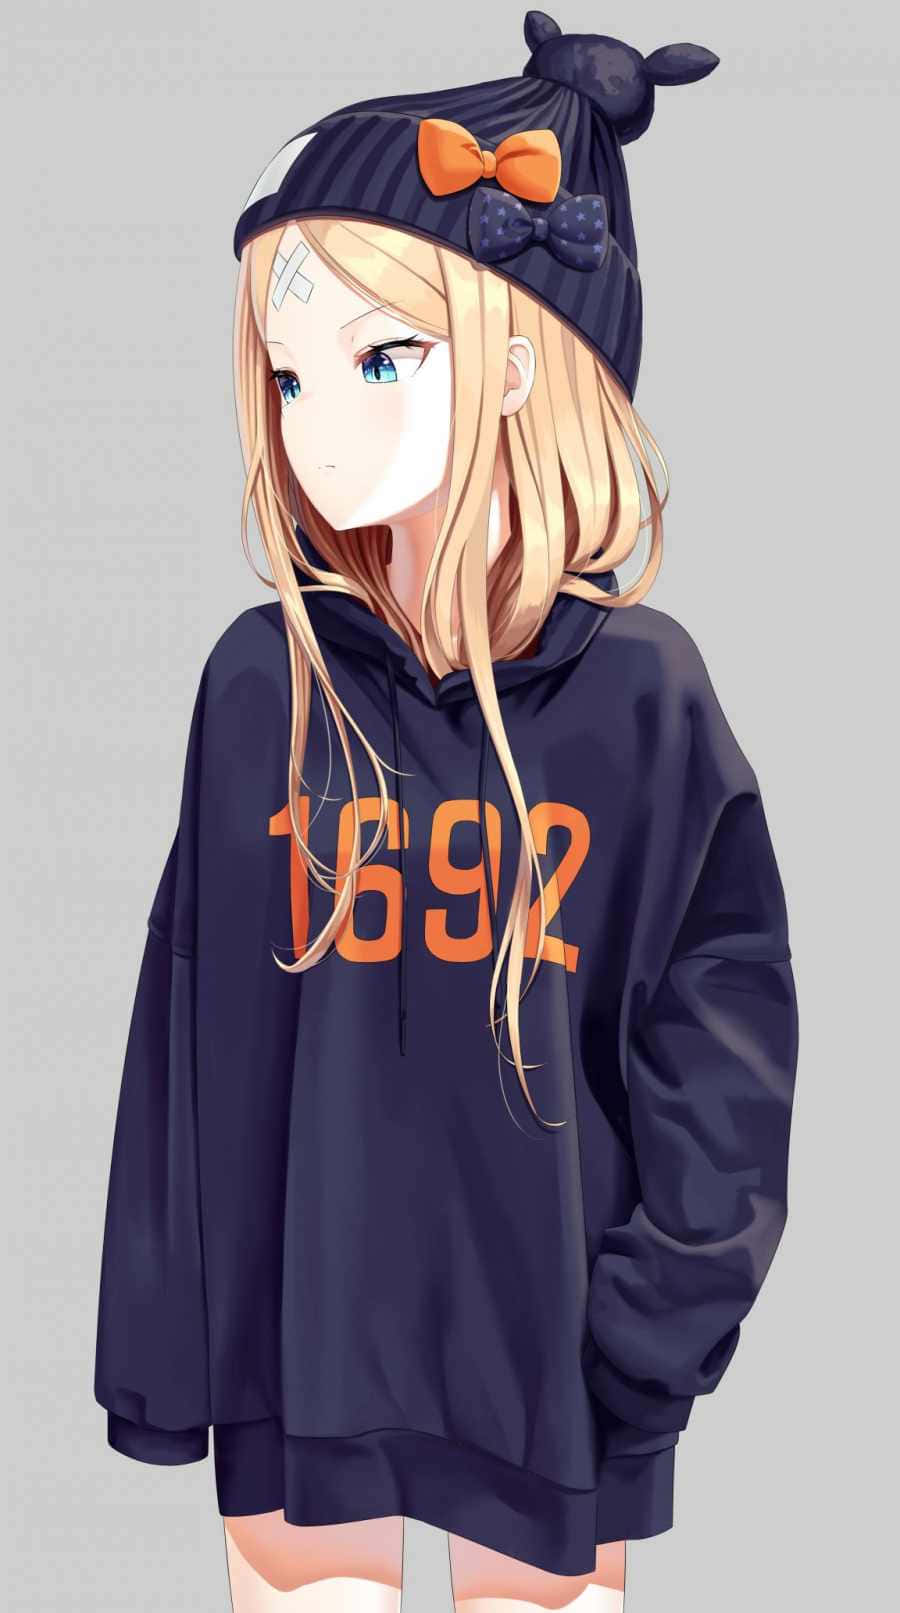 Anime Girl Covered in a Comfy Hoodie